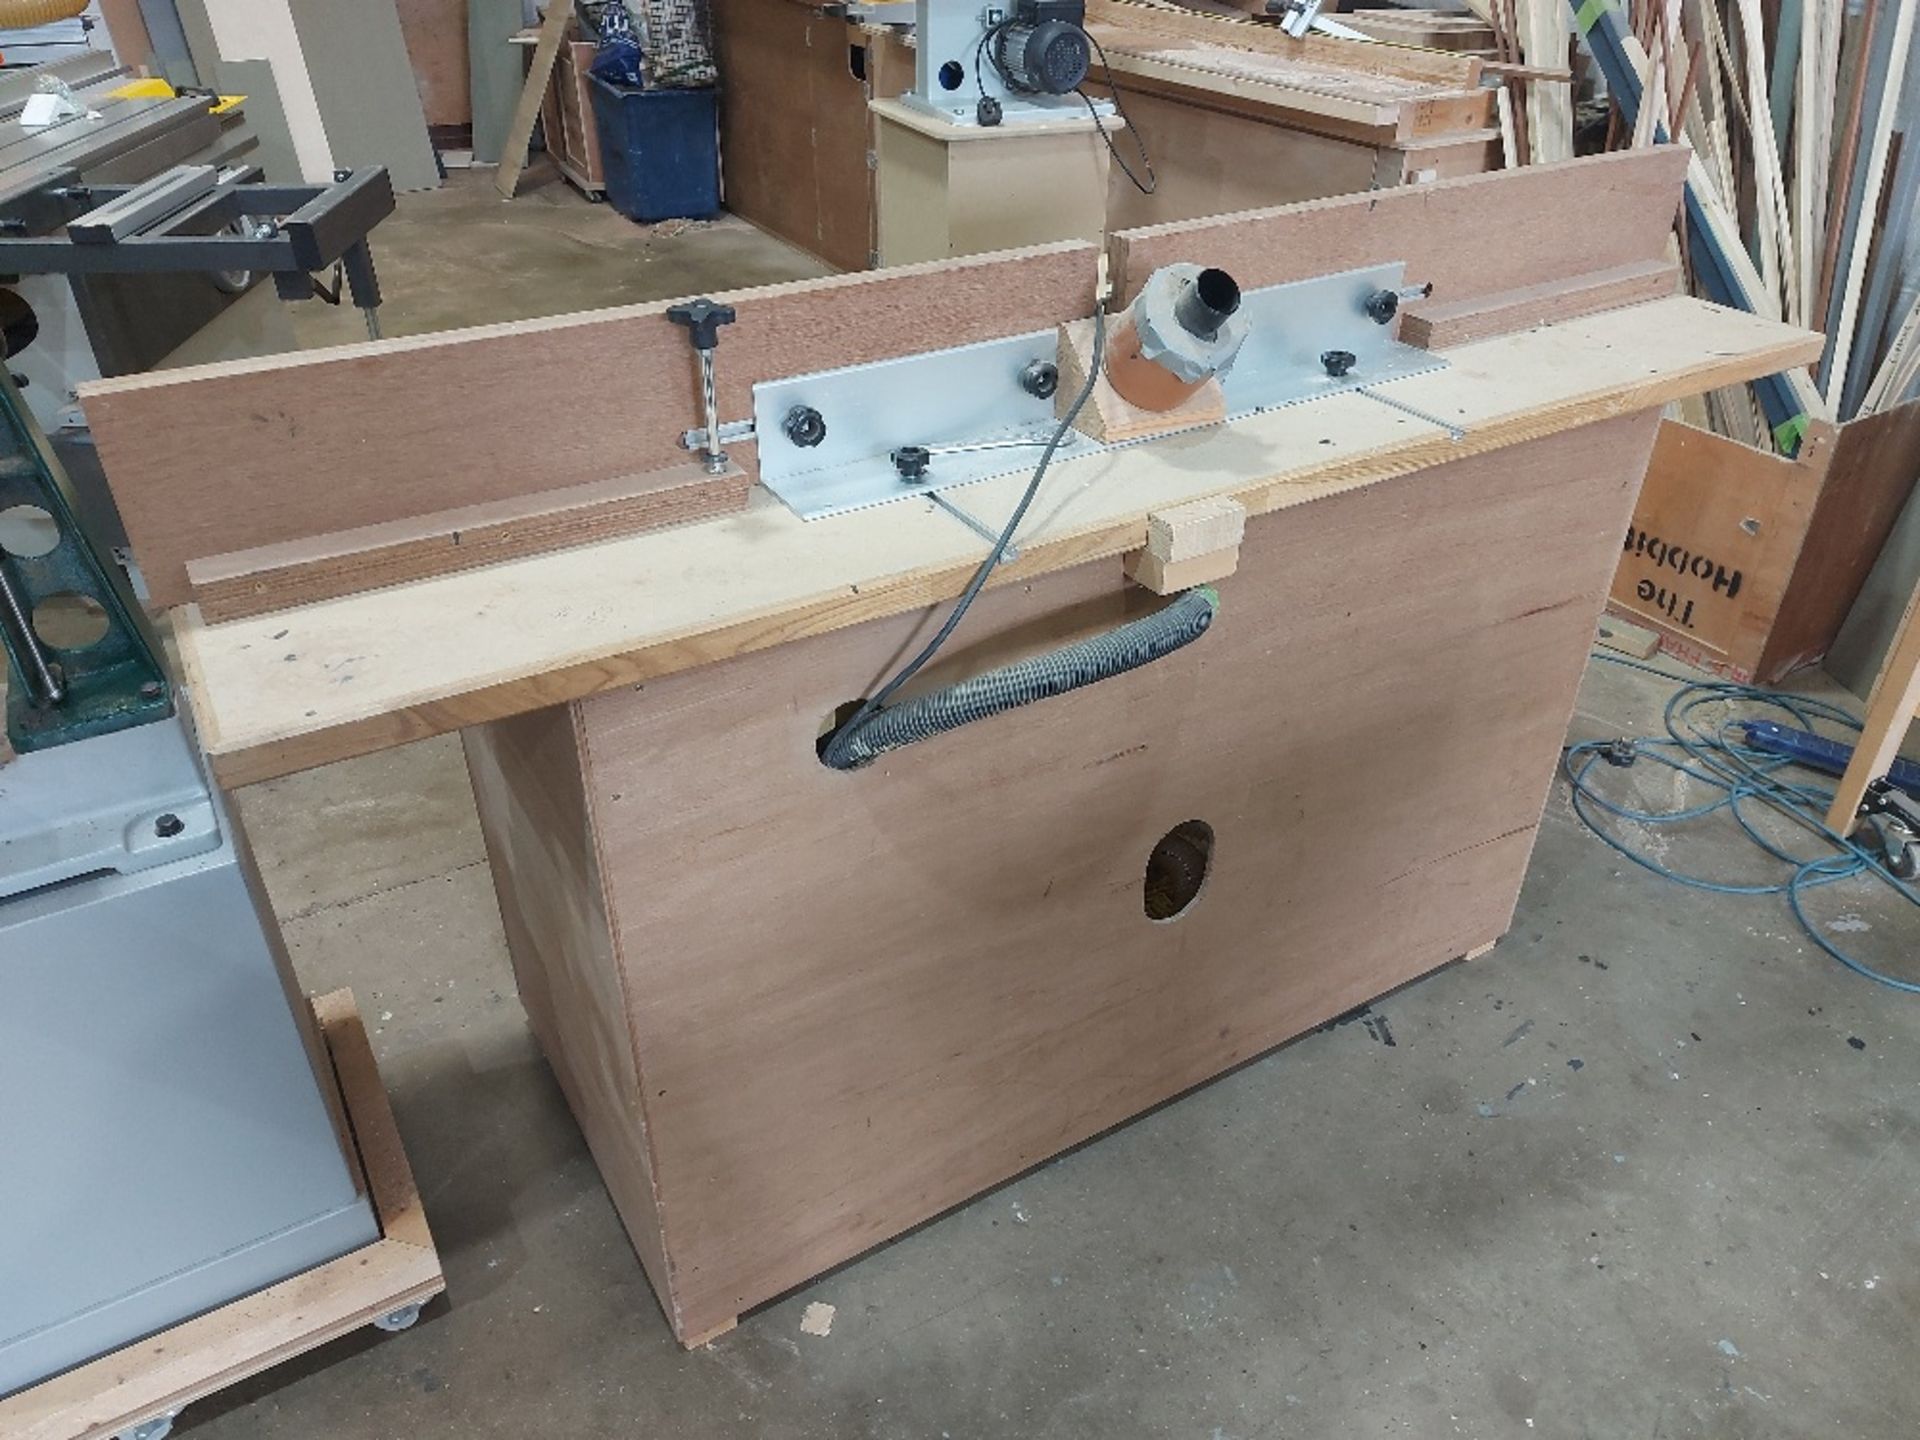 Fabricated Router Workbench With Trend Plunge Router & Karcher MV 3 P Vacuum - Image 2 of 4